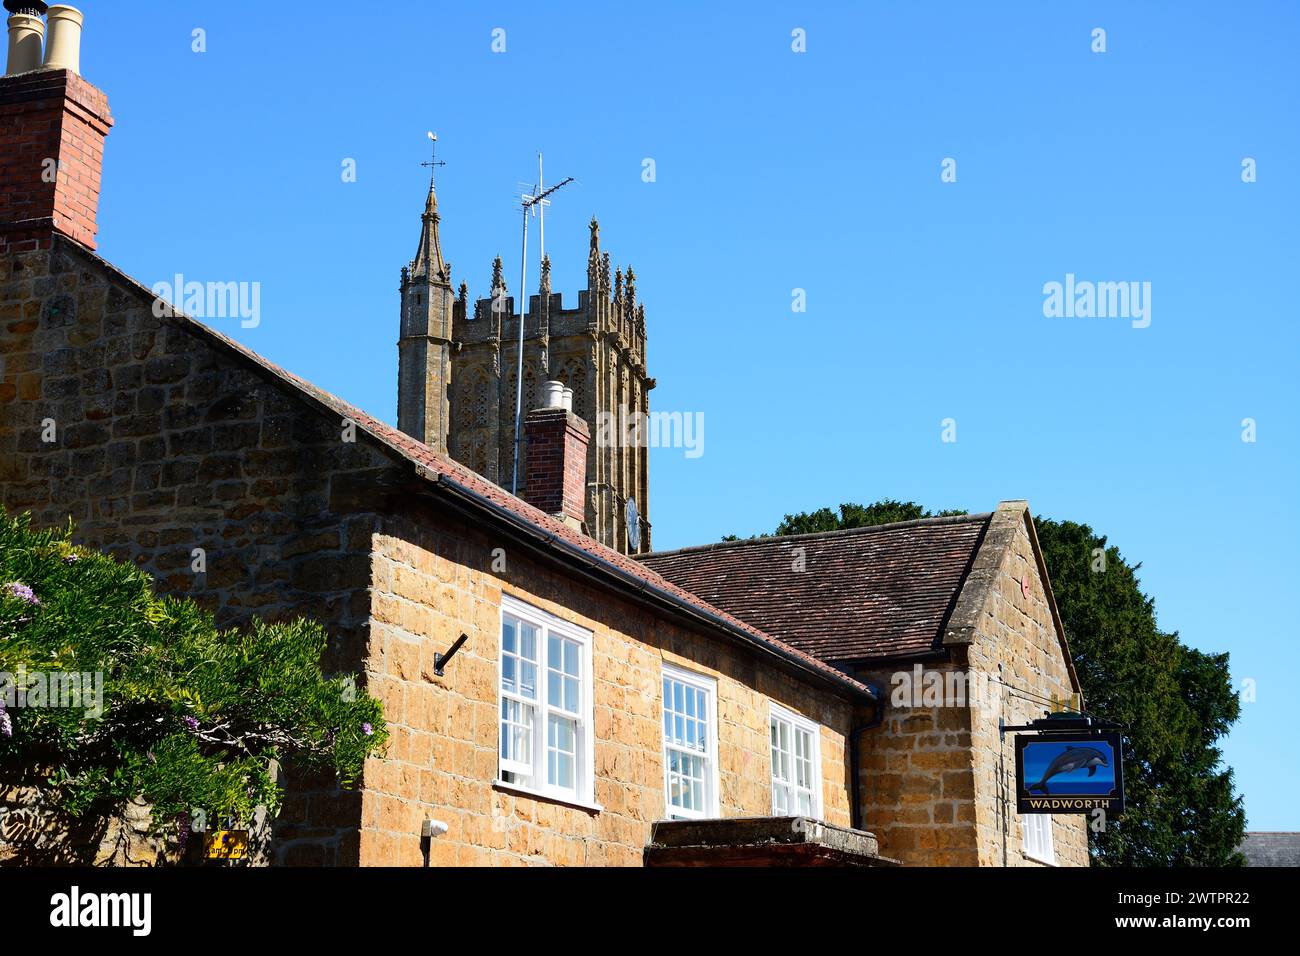 Front view of the Dolphin Inn along Silver Street in the town centre with the minster tower to the rear, Ilminster, Somerset, UK, Europe. Stock Photo